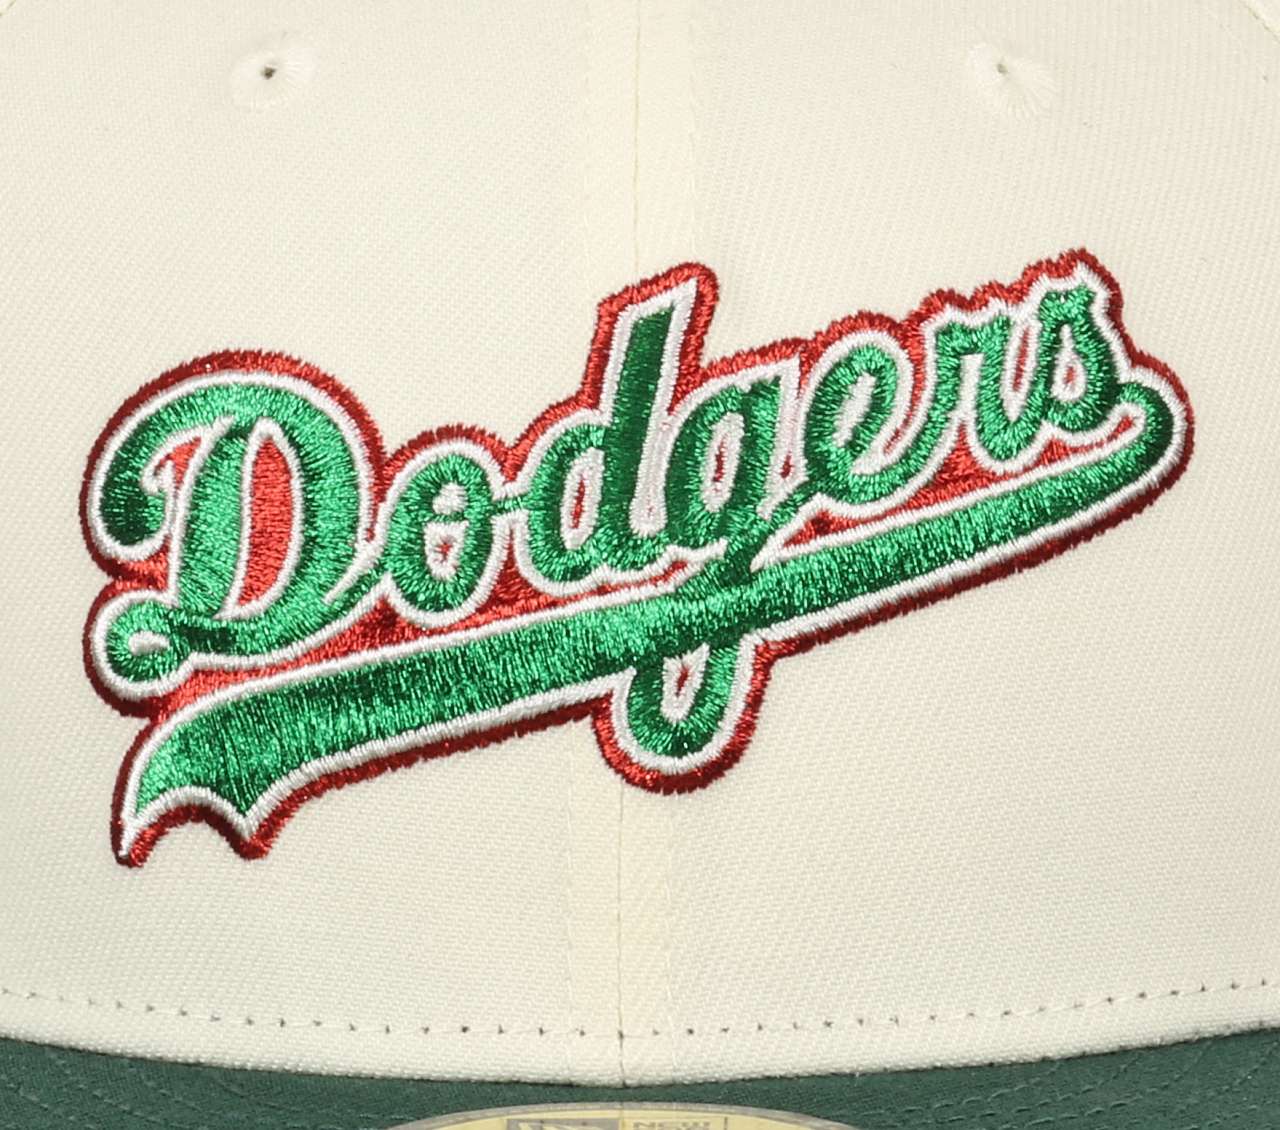 Los Angeles Dodgers MLB Two Tone Cooperstown Chrome Dark Green 59Fifty Basecap New Era